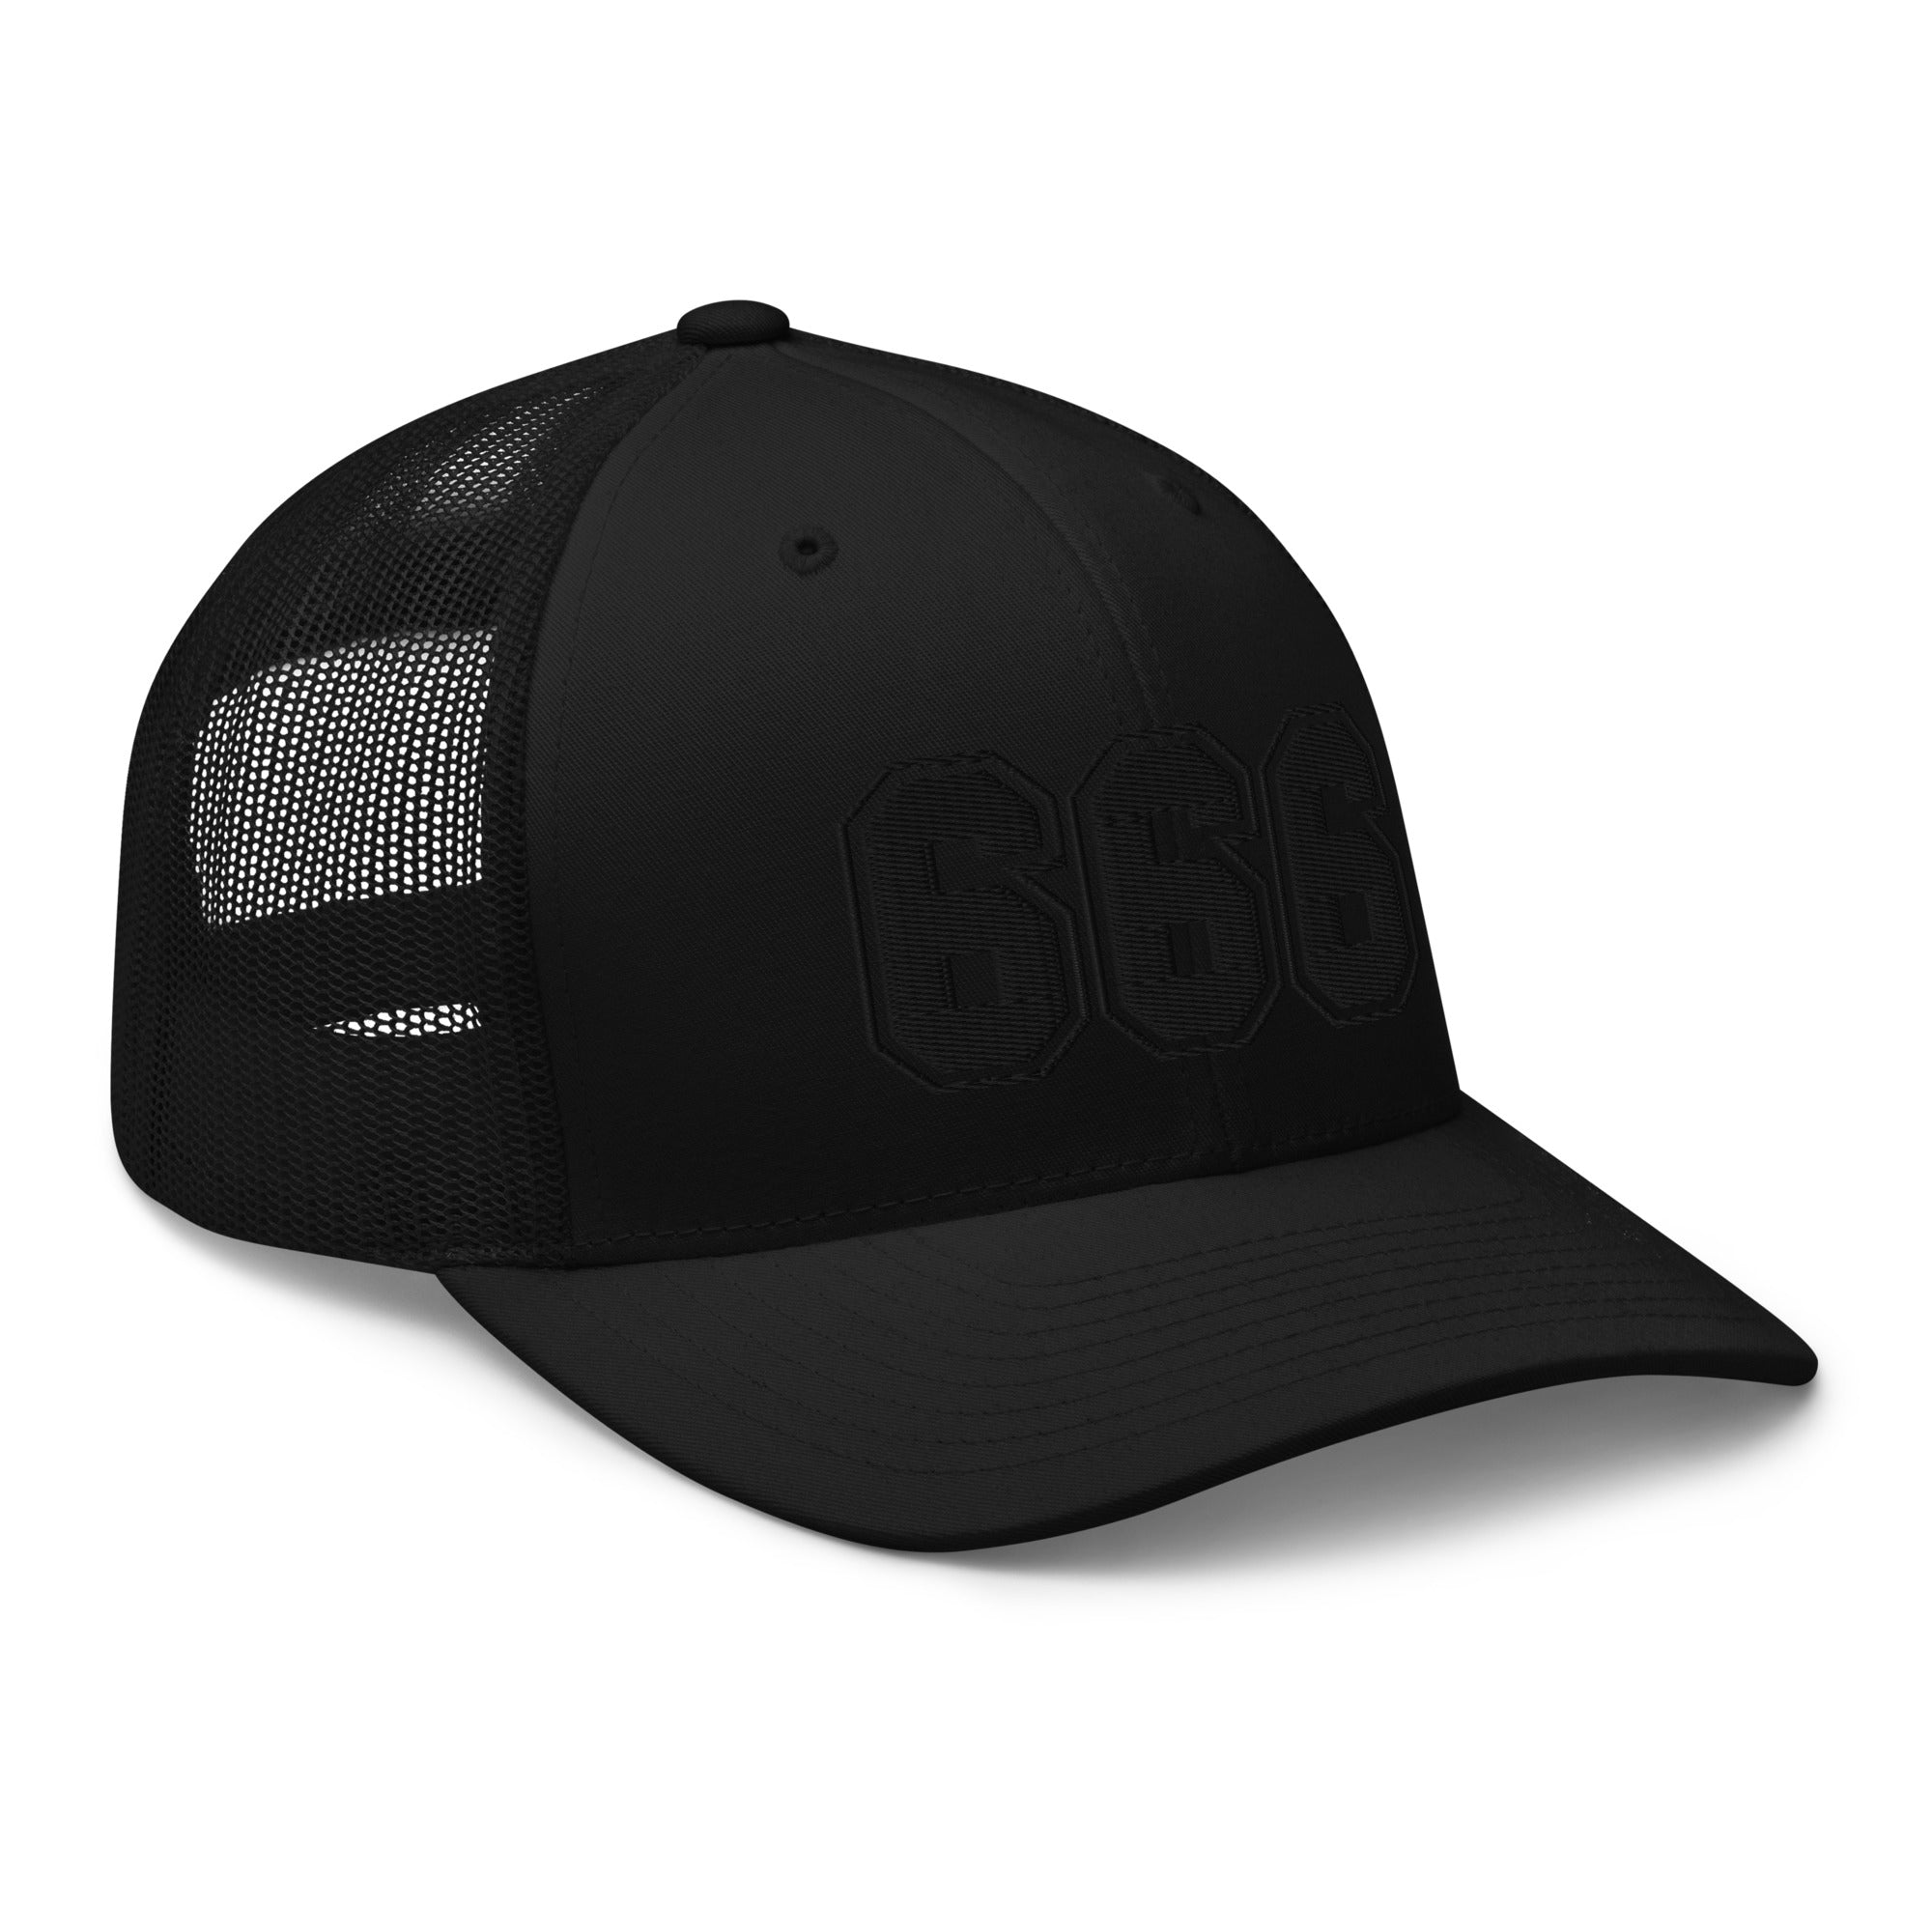 Black 666 Number of the Beast Embroidered Retro Trucker Cap Snapback Hat